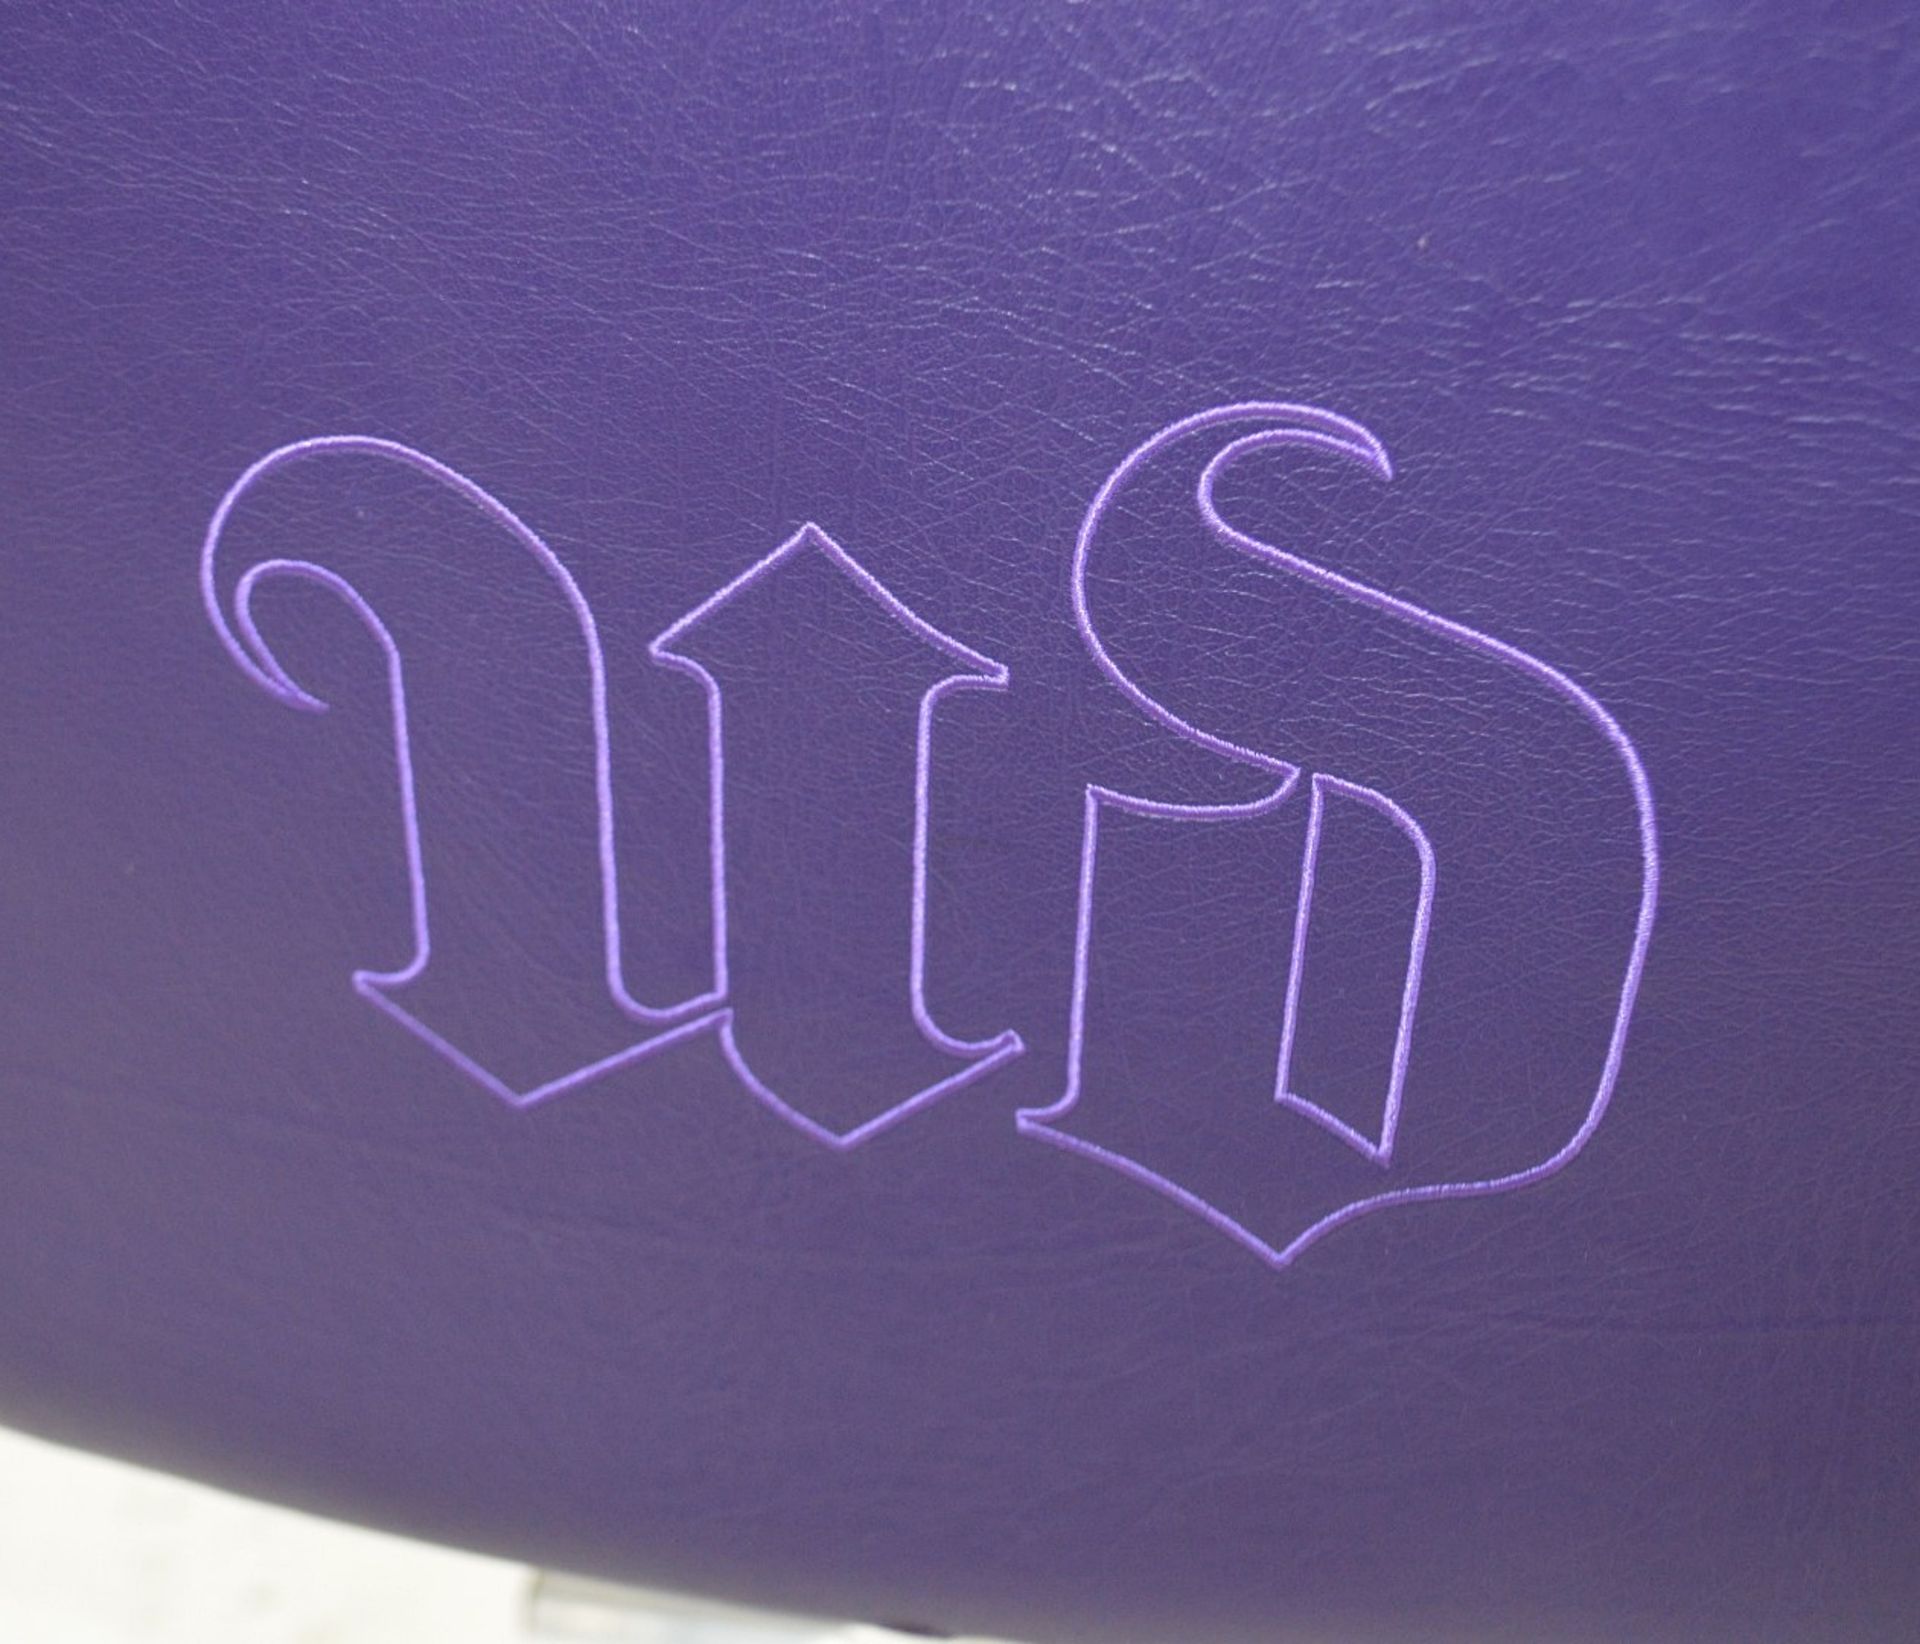 1 x URBAN DECAY Branded Gas-Lift Beauty Salon Swivel Chair With Foot Plate - Upholstered In Purple - Image 3 of 6